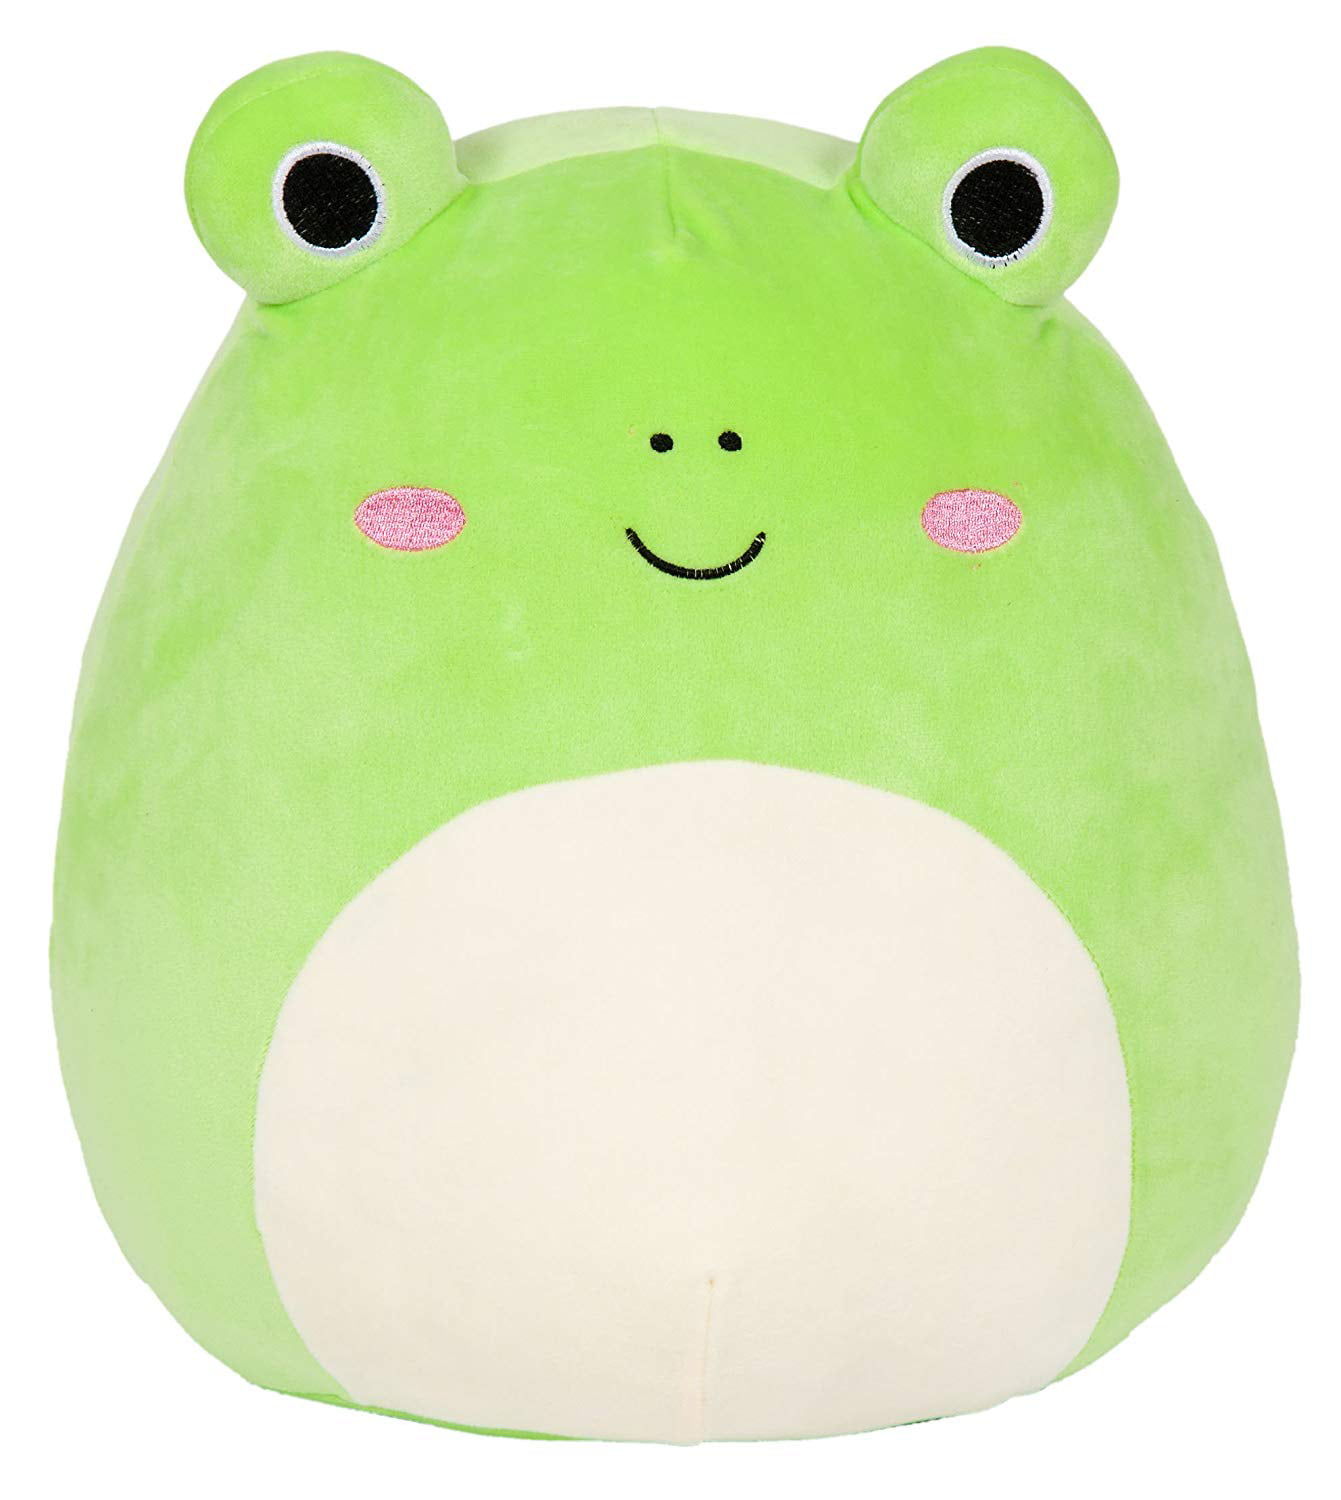 Squishmallow 16 inch Wendy the Frog - Super Soft Plush Toy Pillow Pet -  Walmart.com